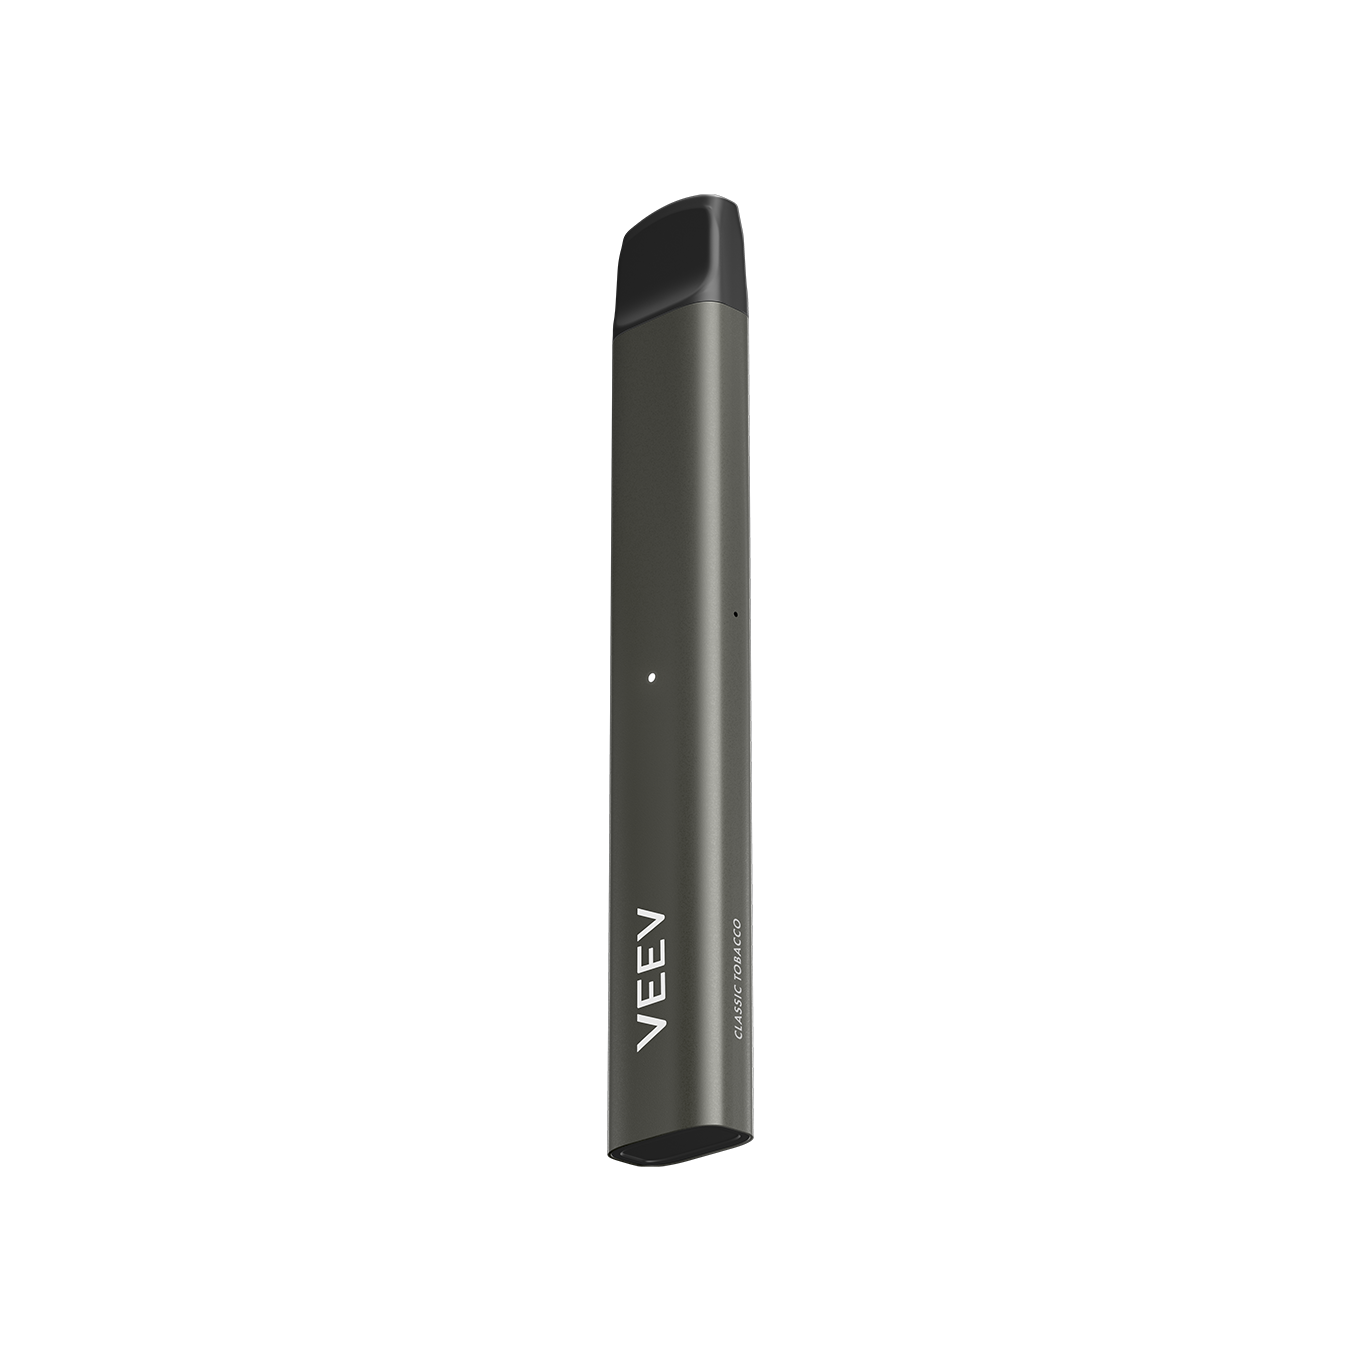 VEEV NOW disposable vape device